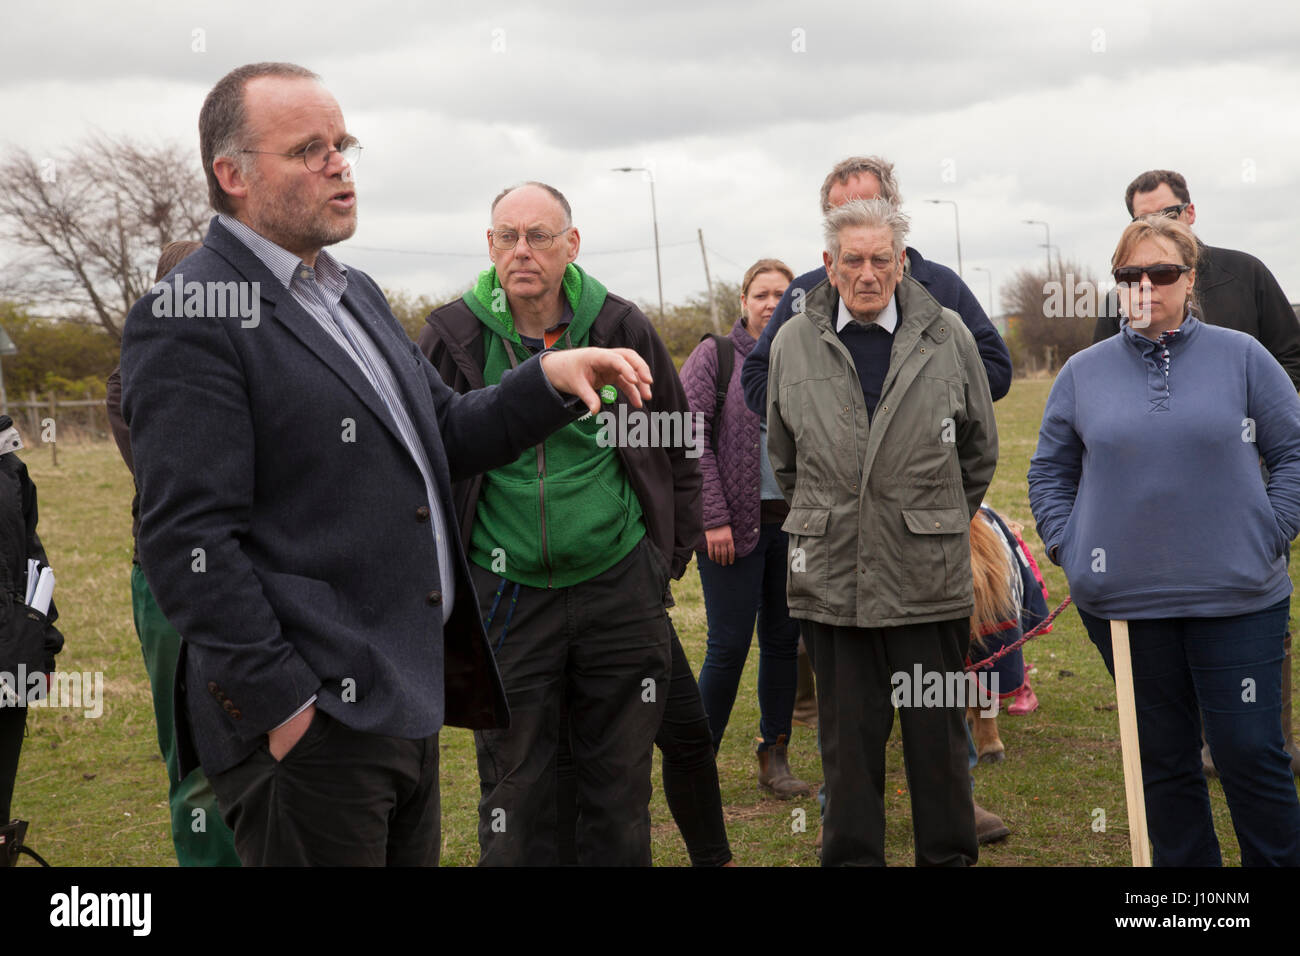 Damhead, Scotland, UK. 17th Apr, 2017. Save Jim´s farm: Object to the development of Pentland Studios on agricultural land. Around 100 people from across the Lothians, Borthers and Fife gathered on Easter Monday to save their local farm from development. Credit: Gabriela Antosova/Alamy Live News Stock Photo